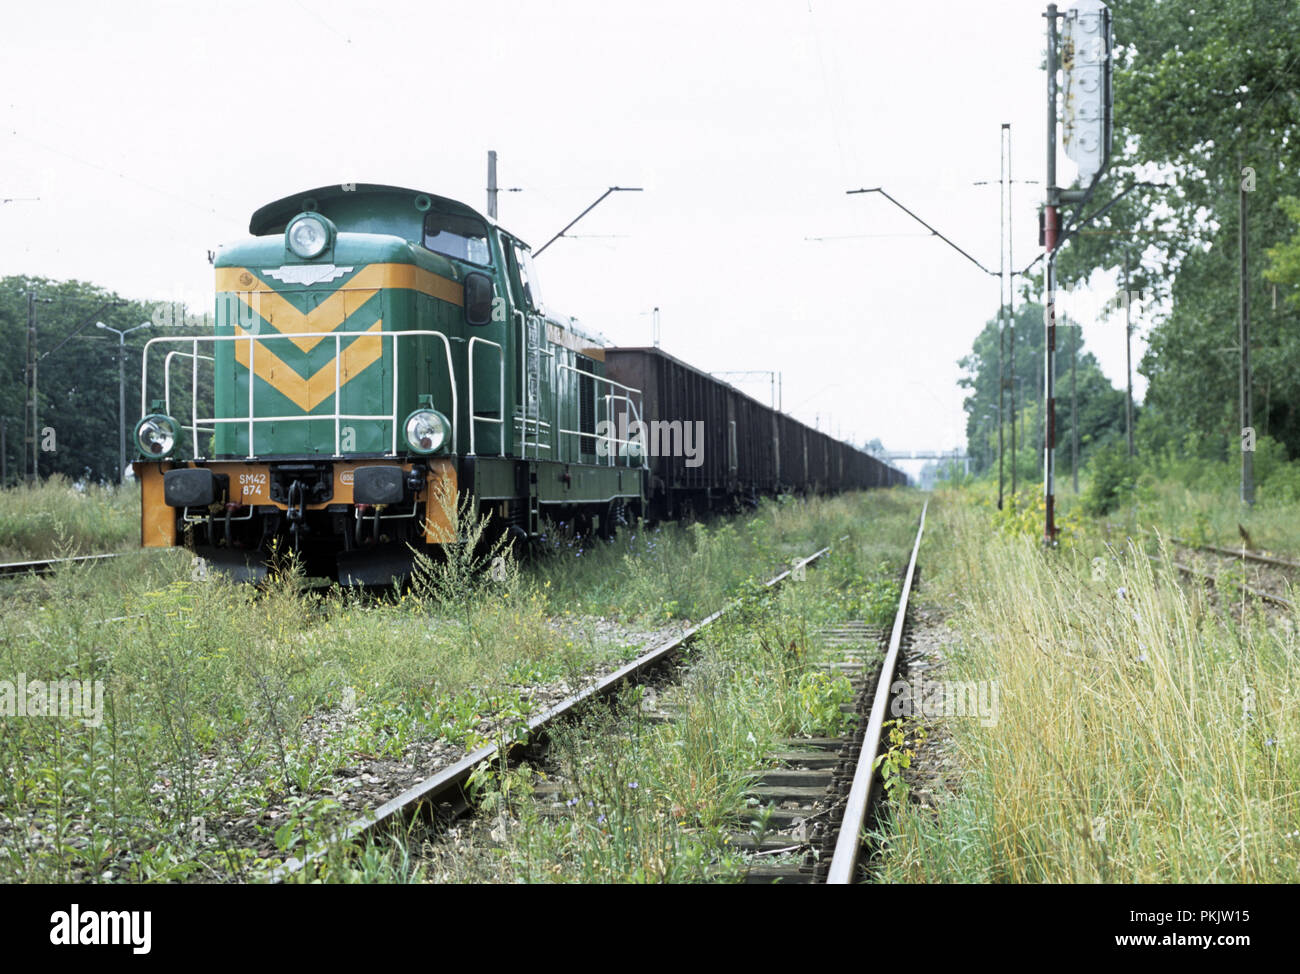 Stationary diesel locomotive train at Wolomin on the Warsaw-Suwalki railway line in Poland May 2008 Stock Photo